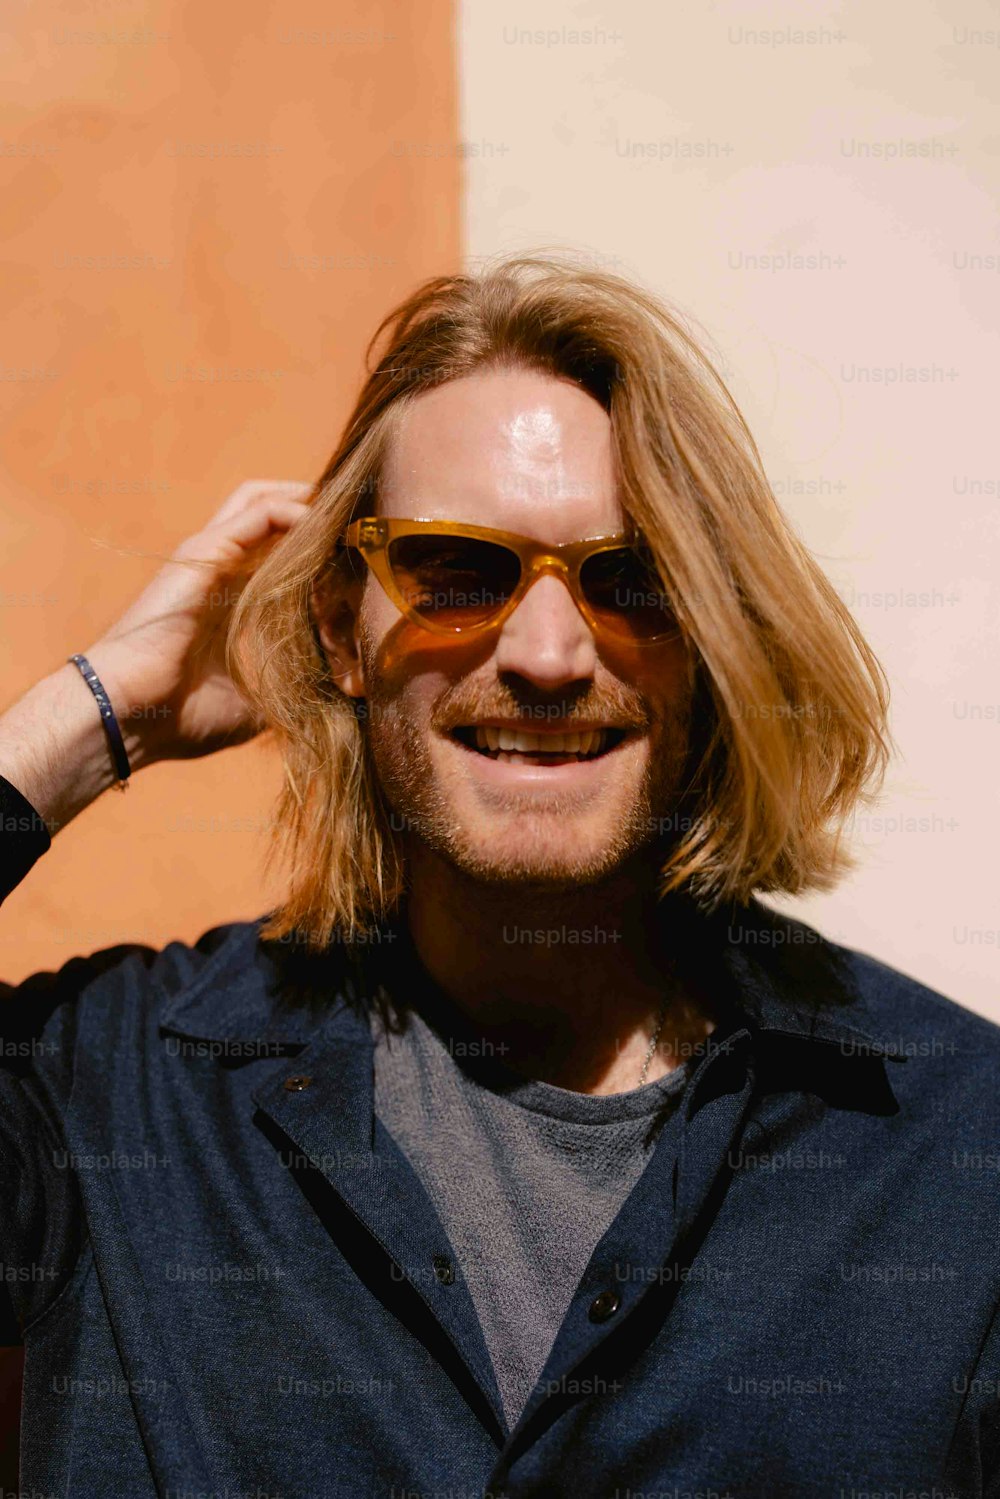 a man with long hair wearing sunglasses and a blue shirt